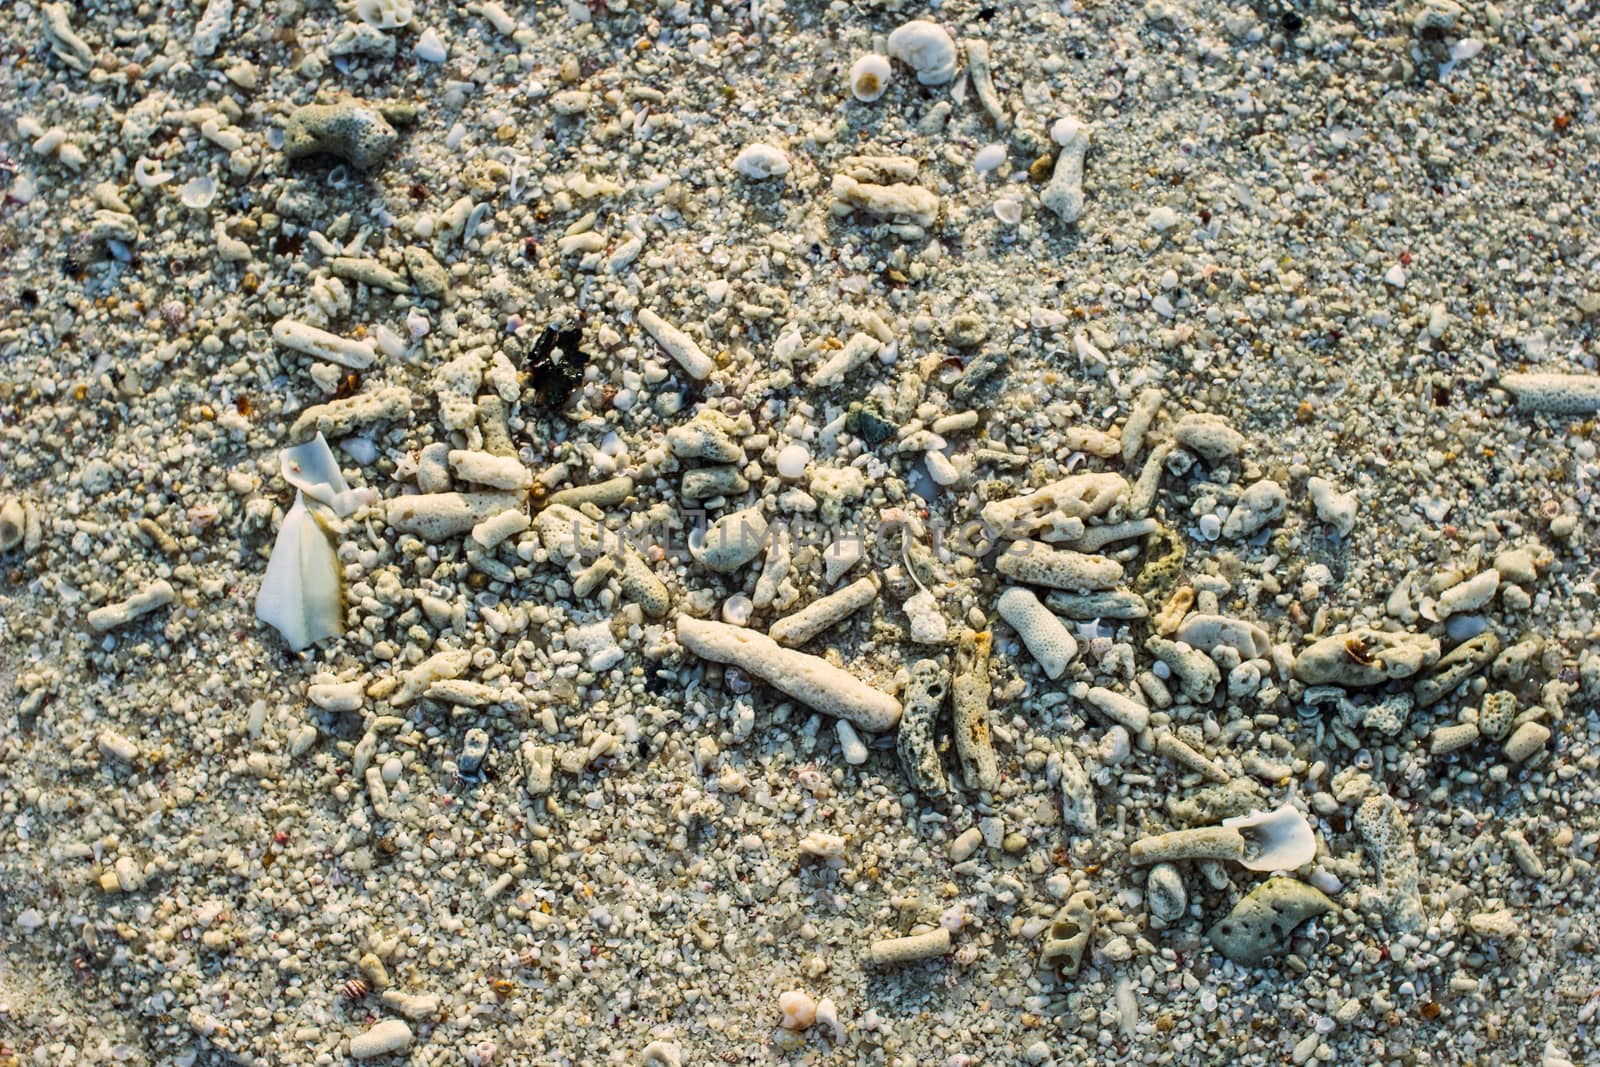 Dry dead coral on the sand.